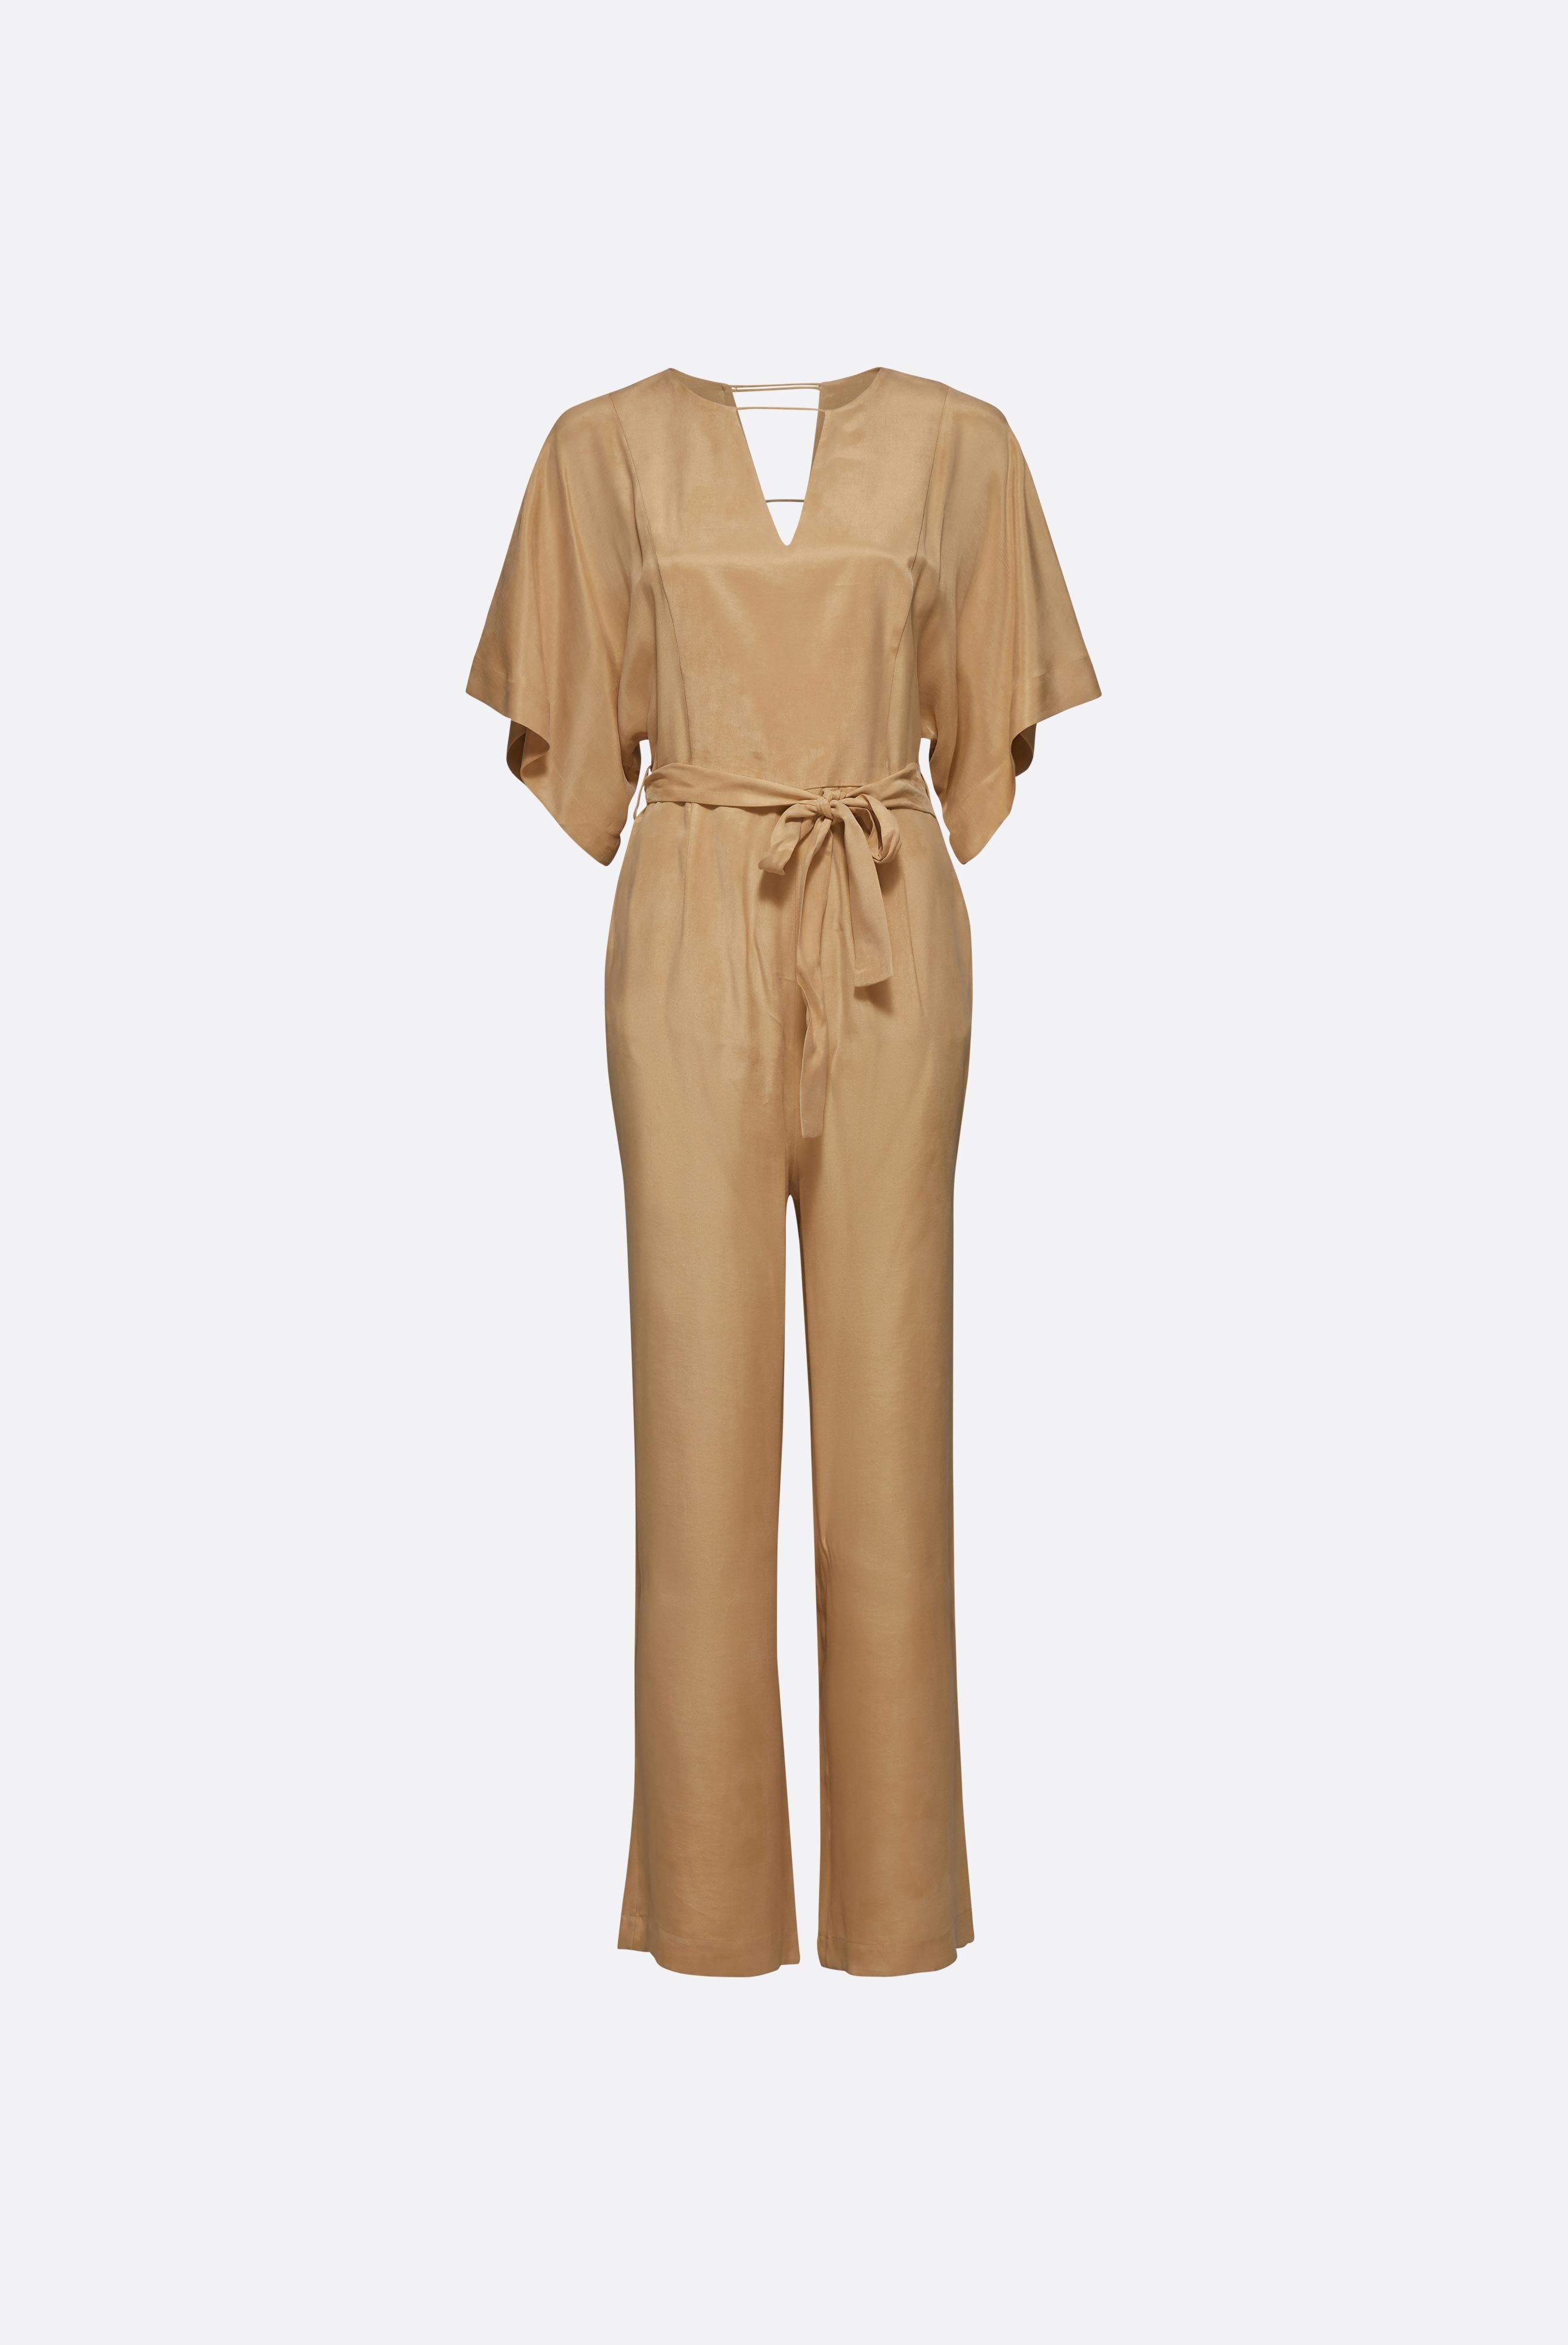 Jeans & Trousers+Jumpsuit with wide Sleeves+05.658Q.22.155007.250.36